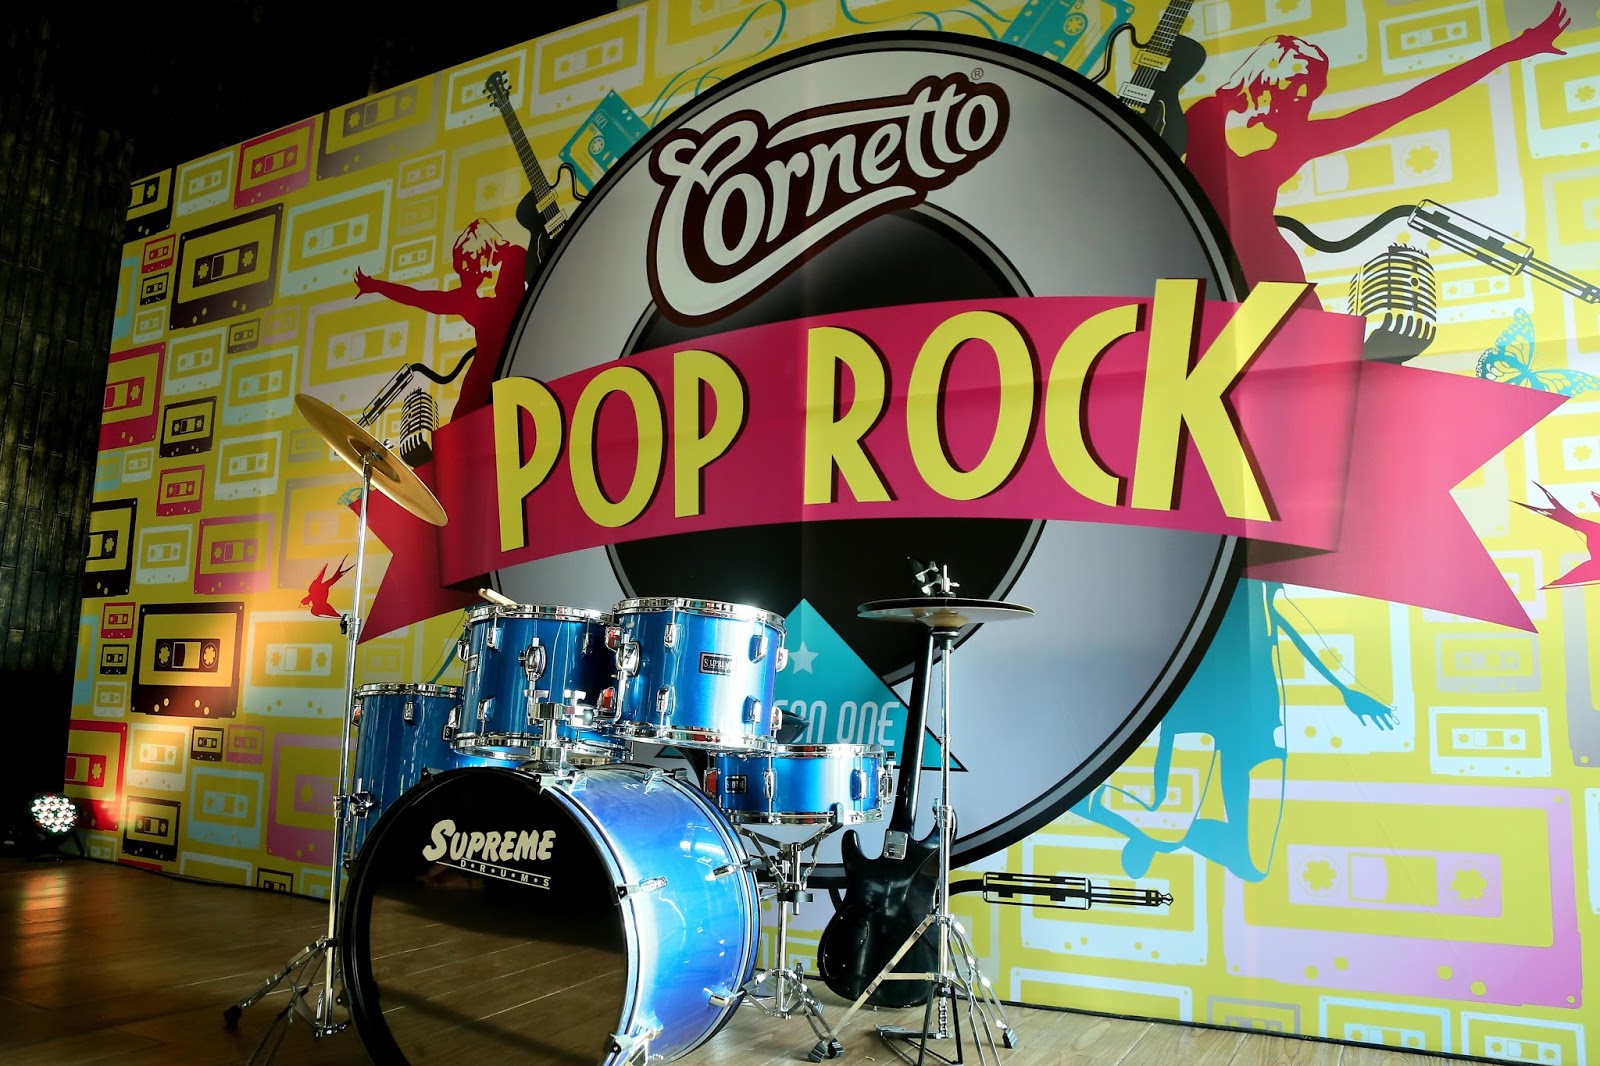 The inception of Cornetto Pop Rock is also fresh a little bubbly with a pin...